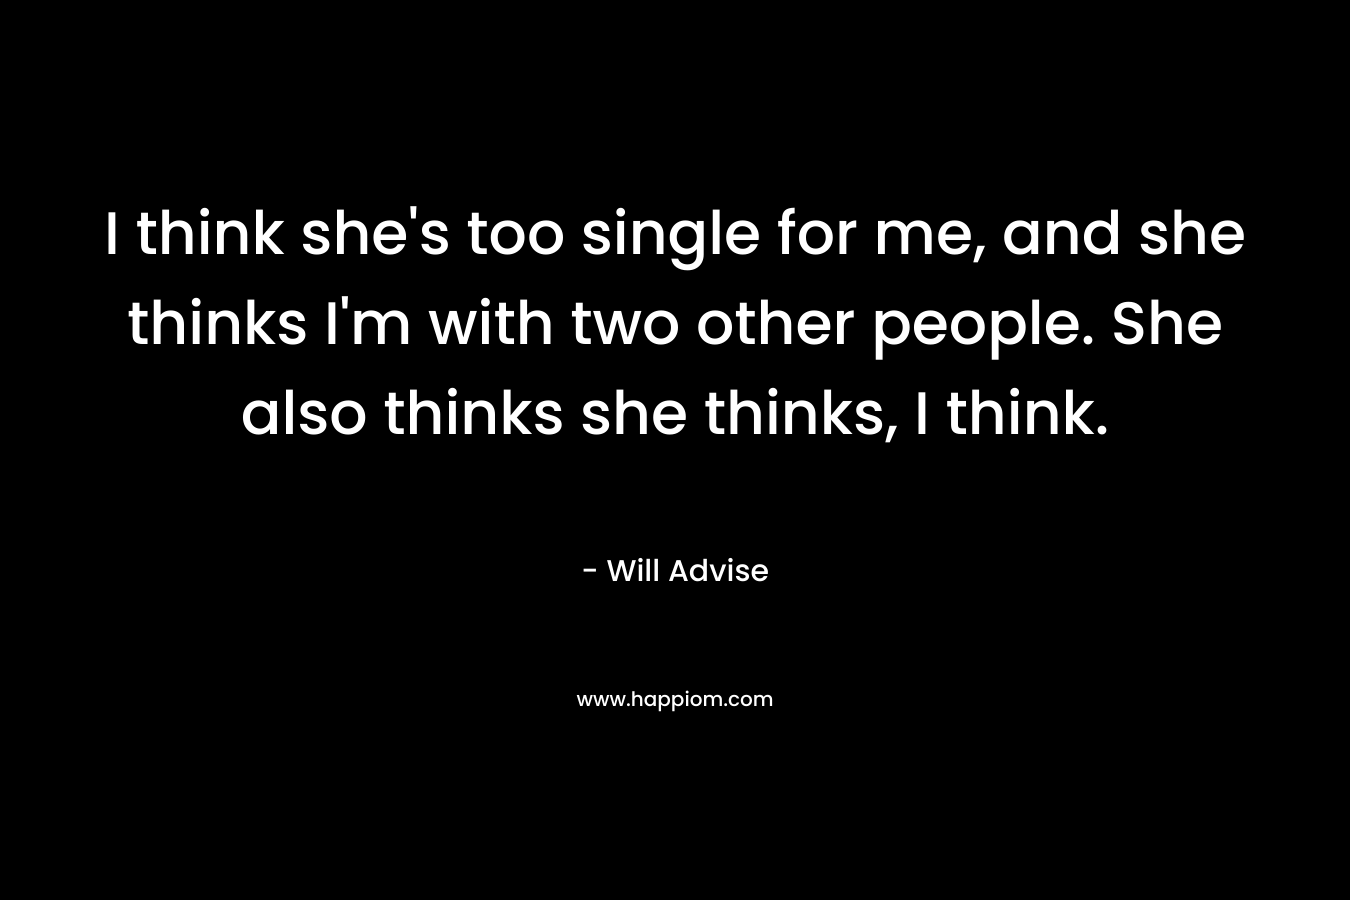 I think she's too single for me, and she thinks I'm with two other people. She also thinks she thinks, I think.